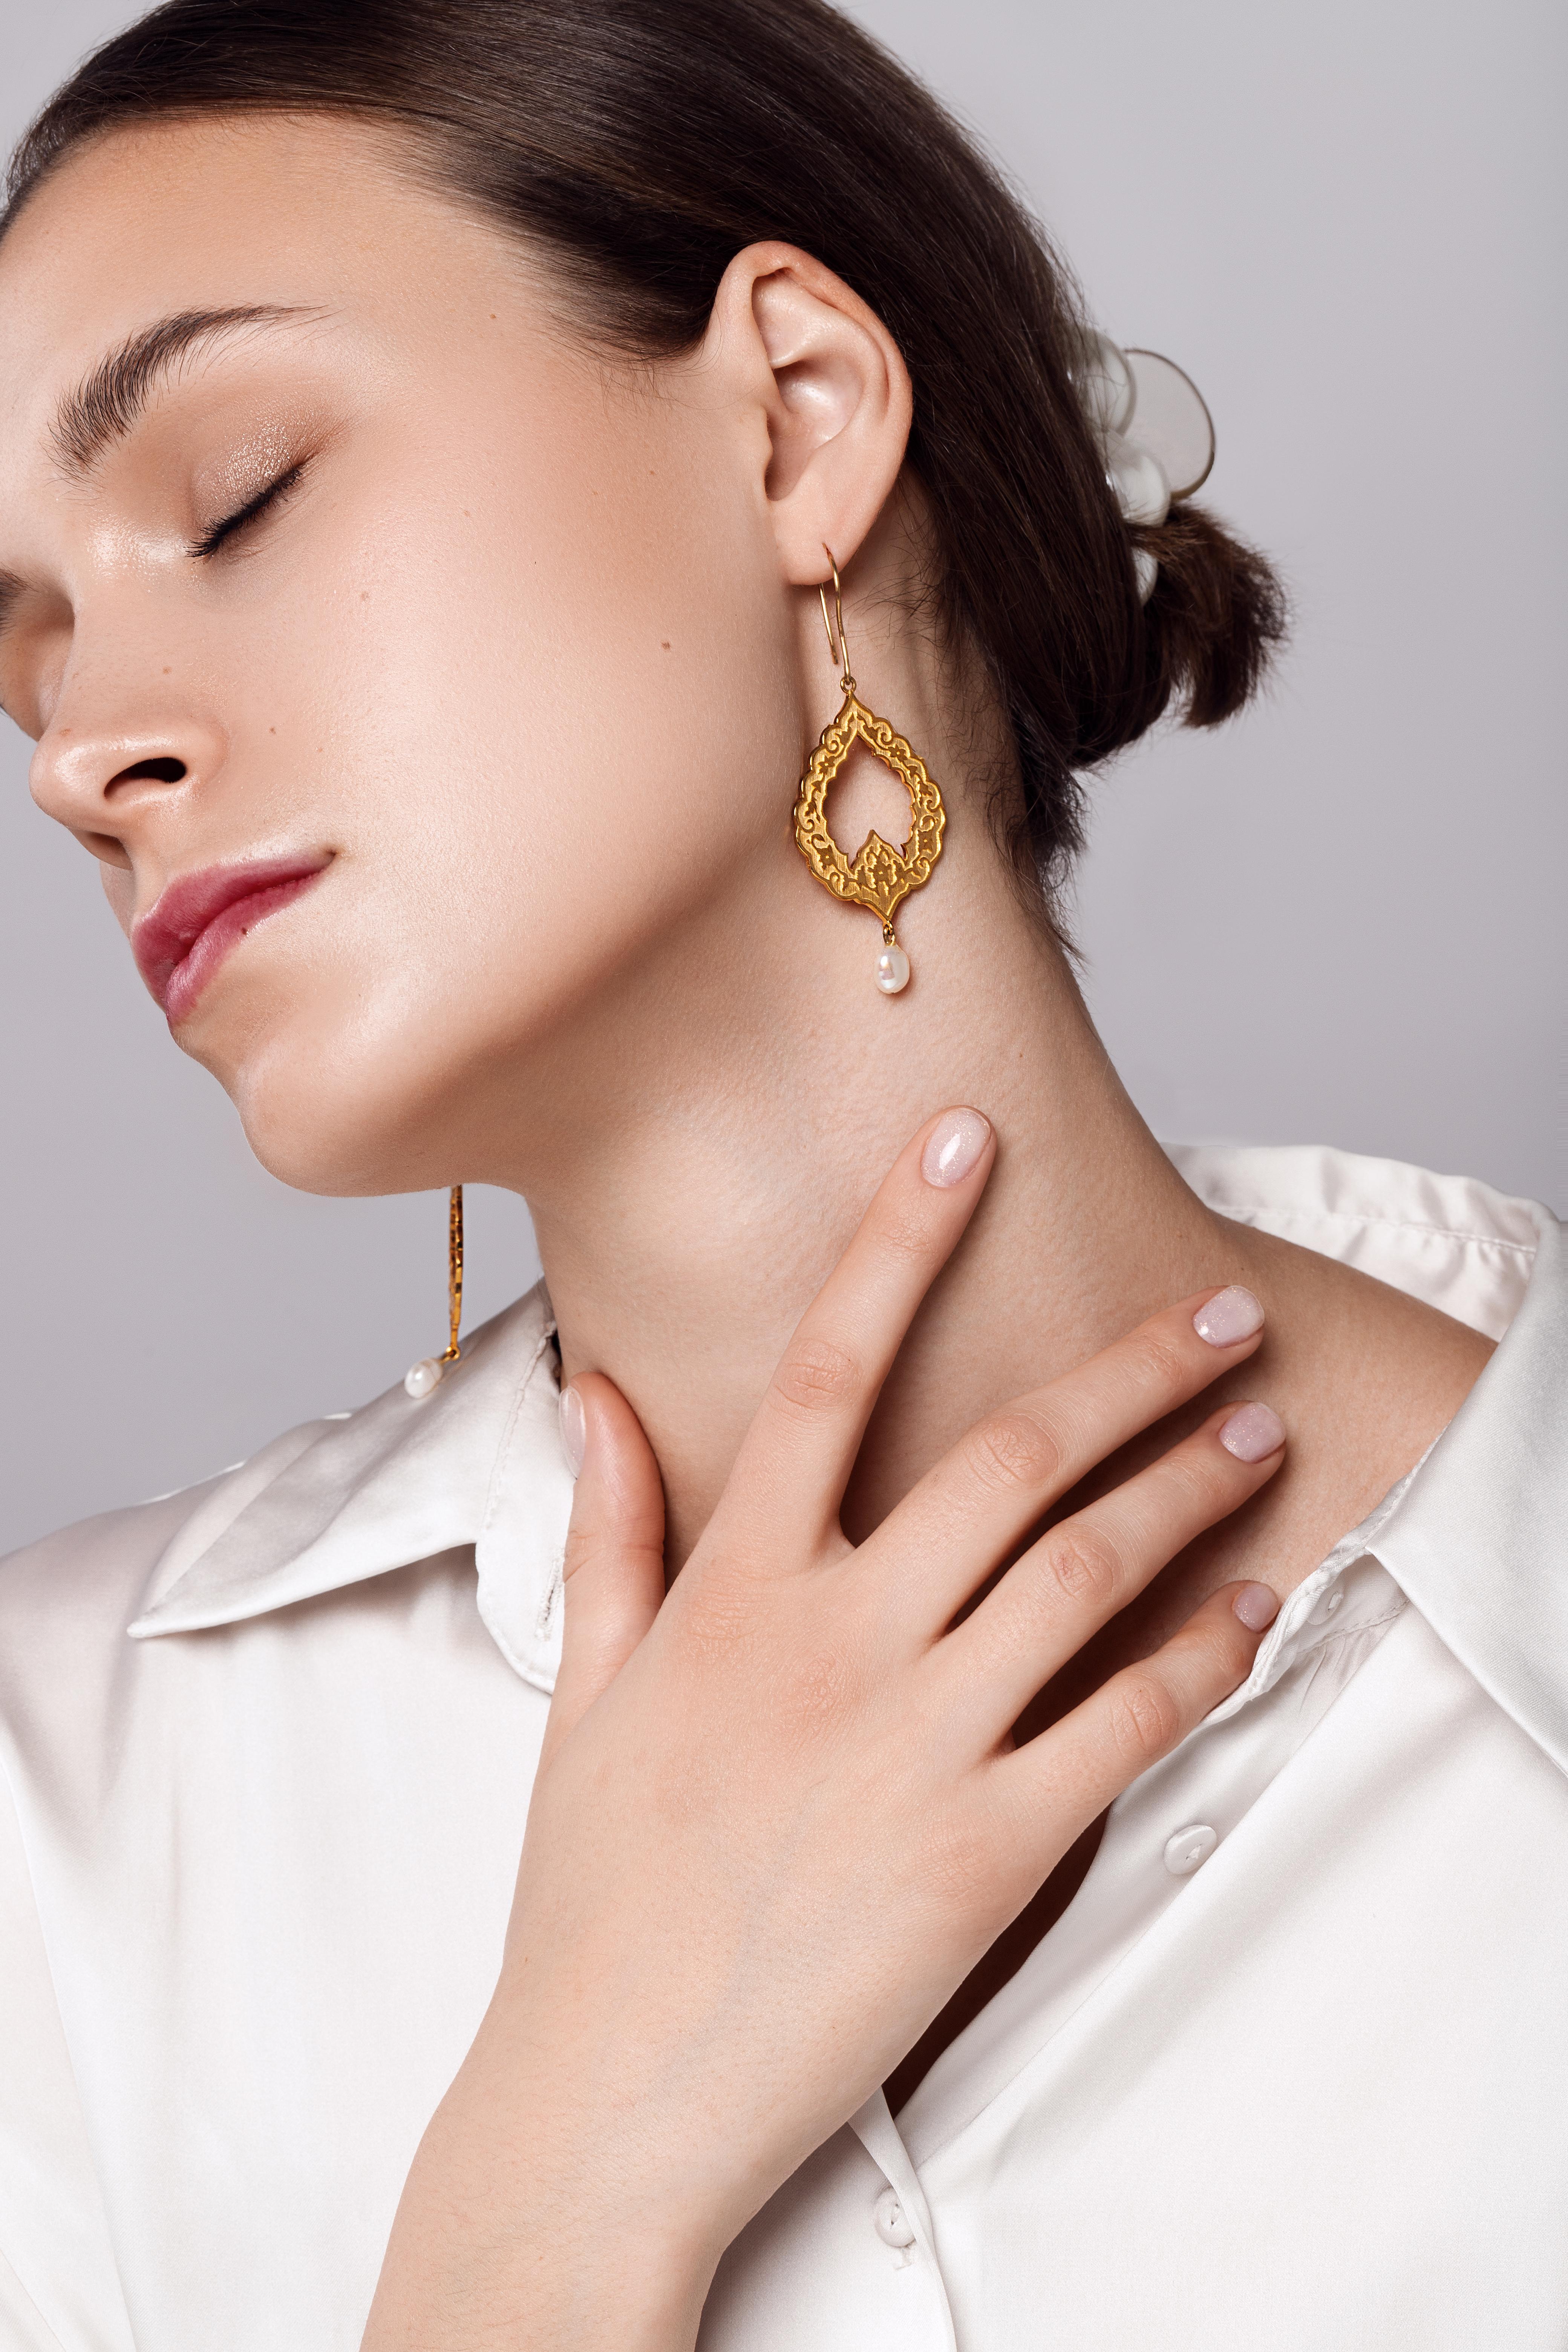 Eslimi earring hand crafted by extremely skilled hands in 18K yellow gold & natural baroque pearl and was inspired by arabesque and Middle eastern art & architecture. This timeless and gorgeous earring has delicate pattern on both sides and is